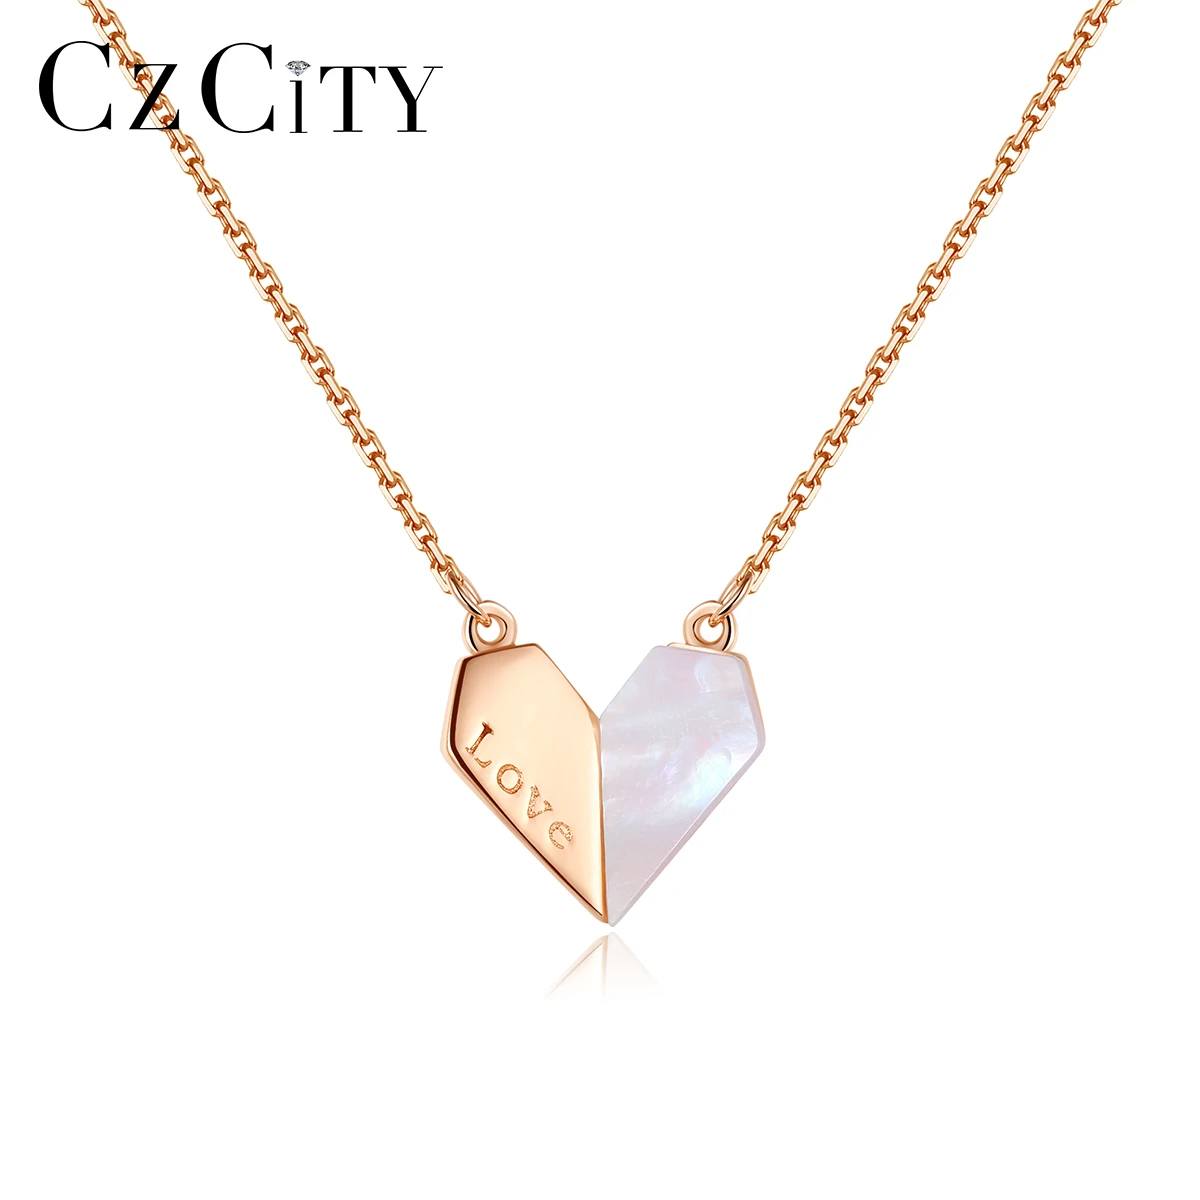 

CZCITY Heart Sea Shell 925 Sterling Silver Pendant Necklace for Women Factory Directly Wholesale Girls Pendants